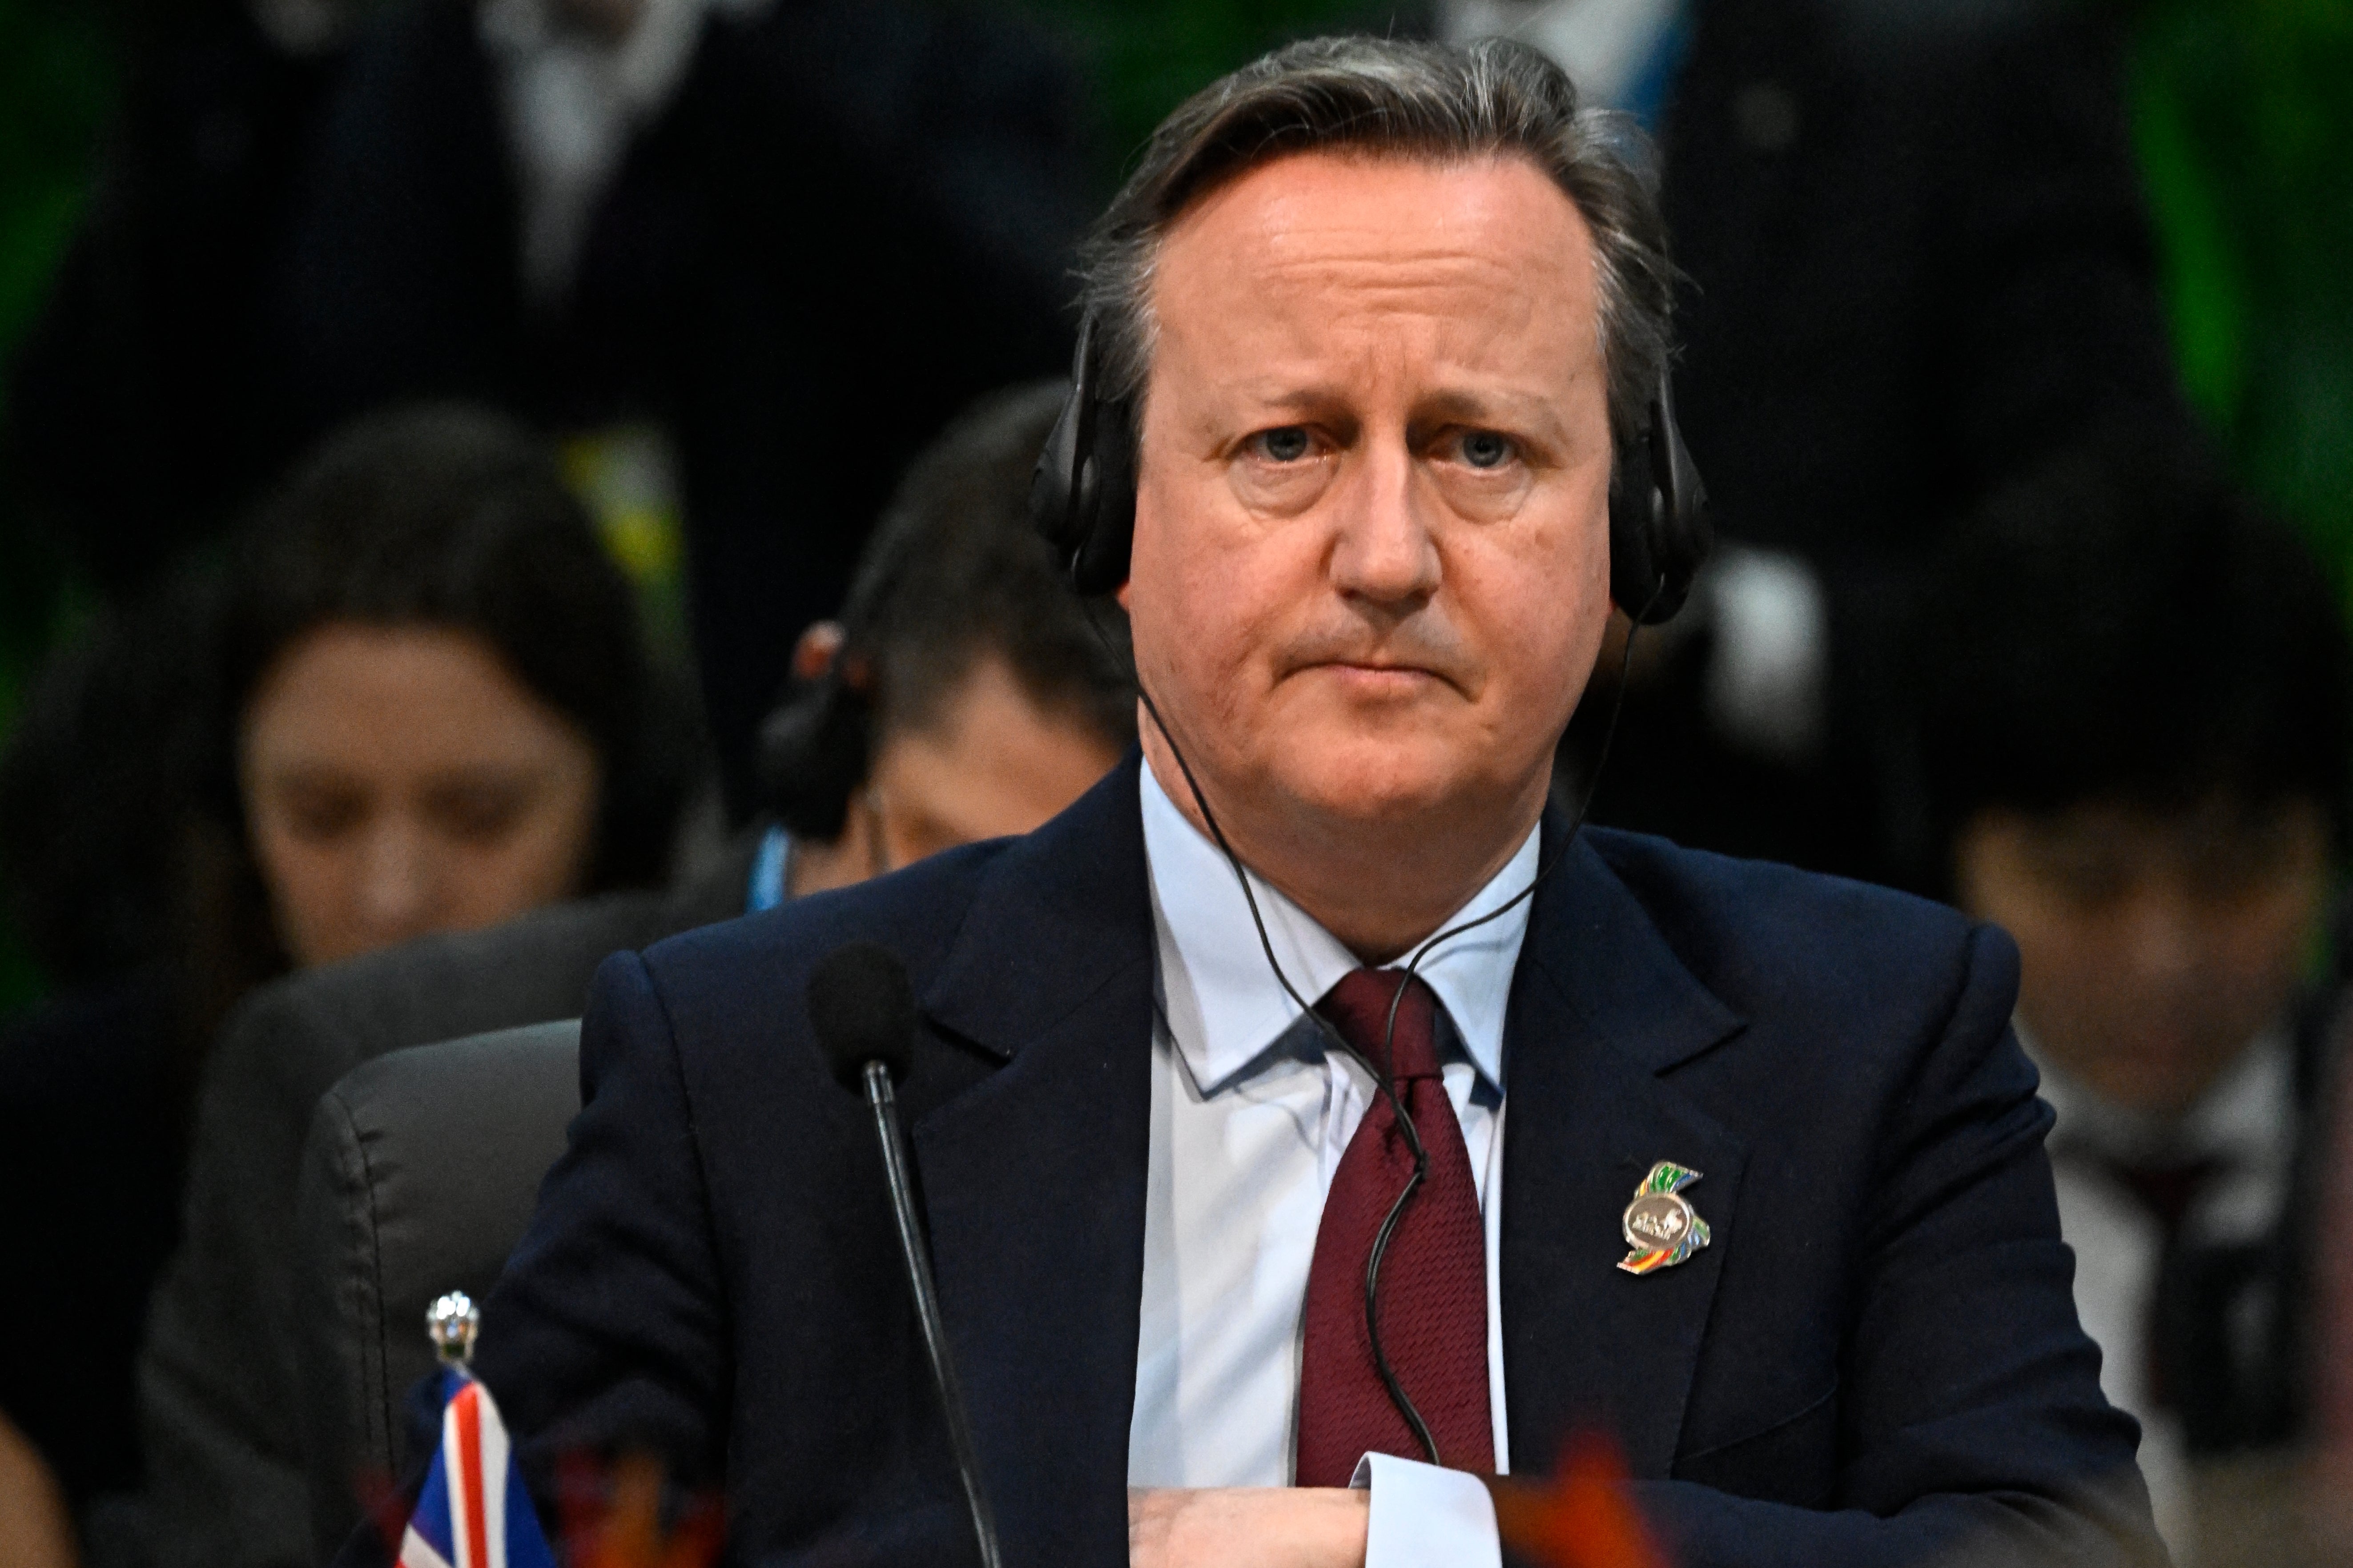 David Cameron at the G20 foreign ministers meeting in Rio de Janeiro